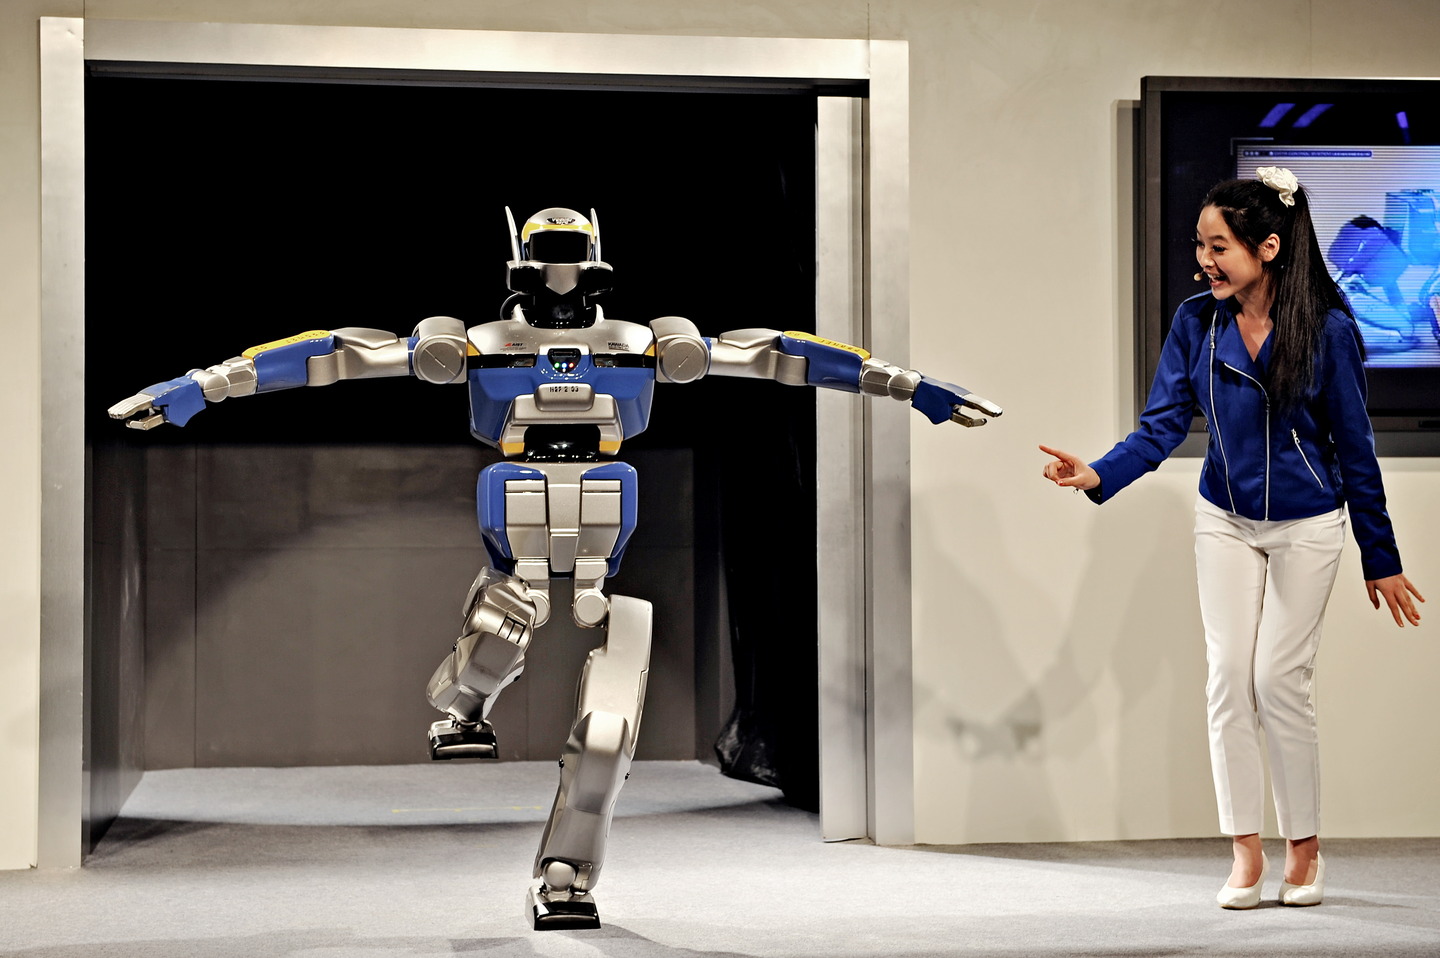 Can the robot with senses bring something new to Japan?